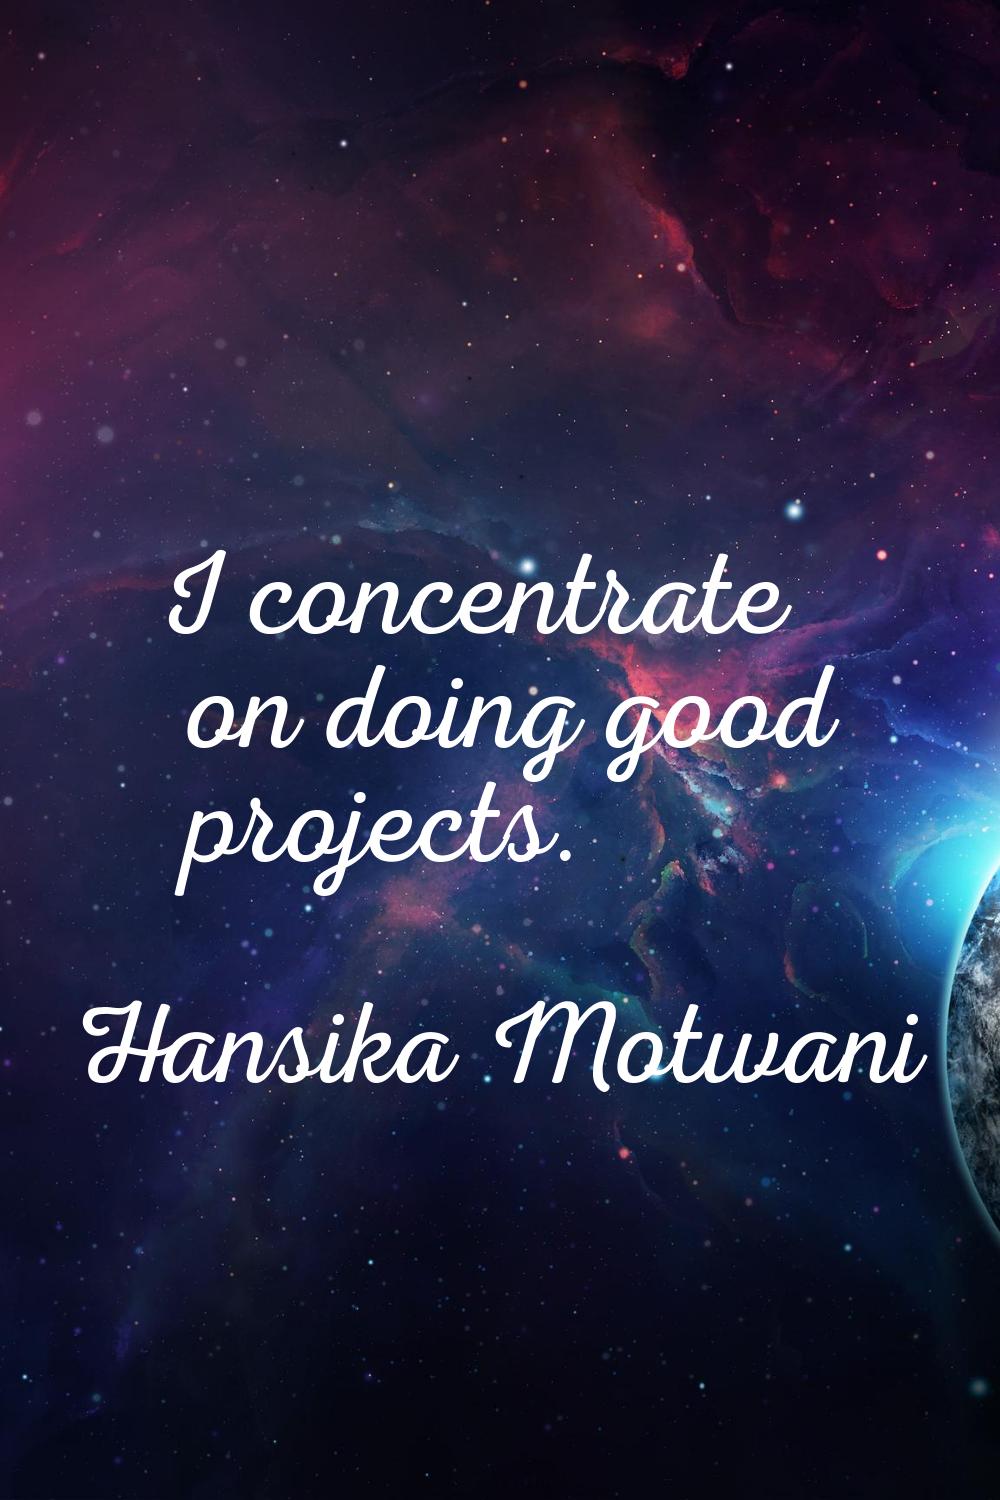 I concentrate on doing good projects.